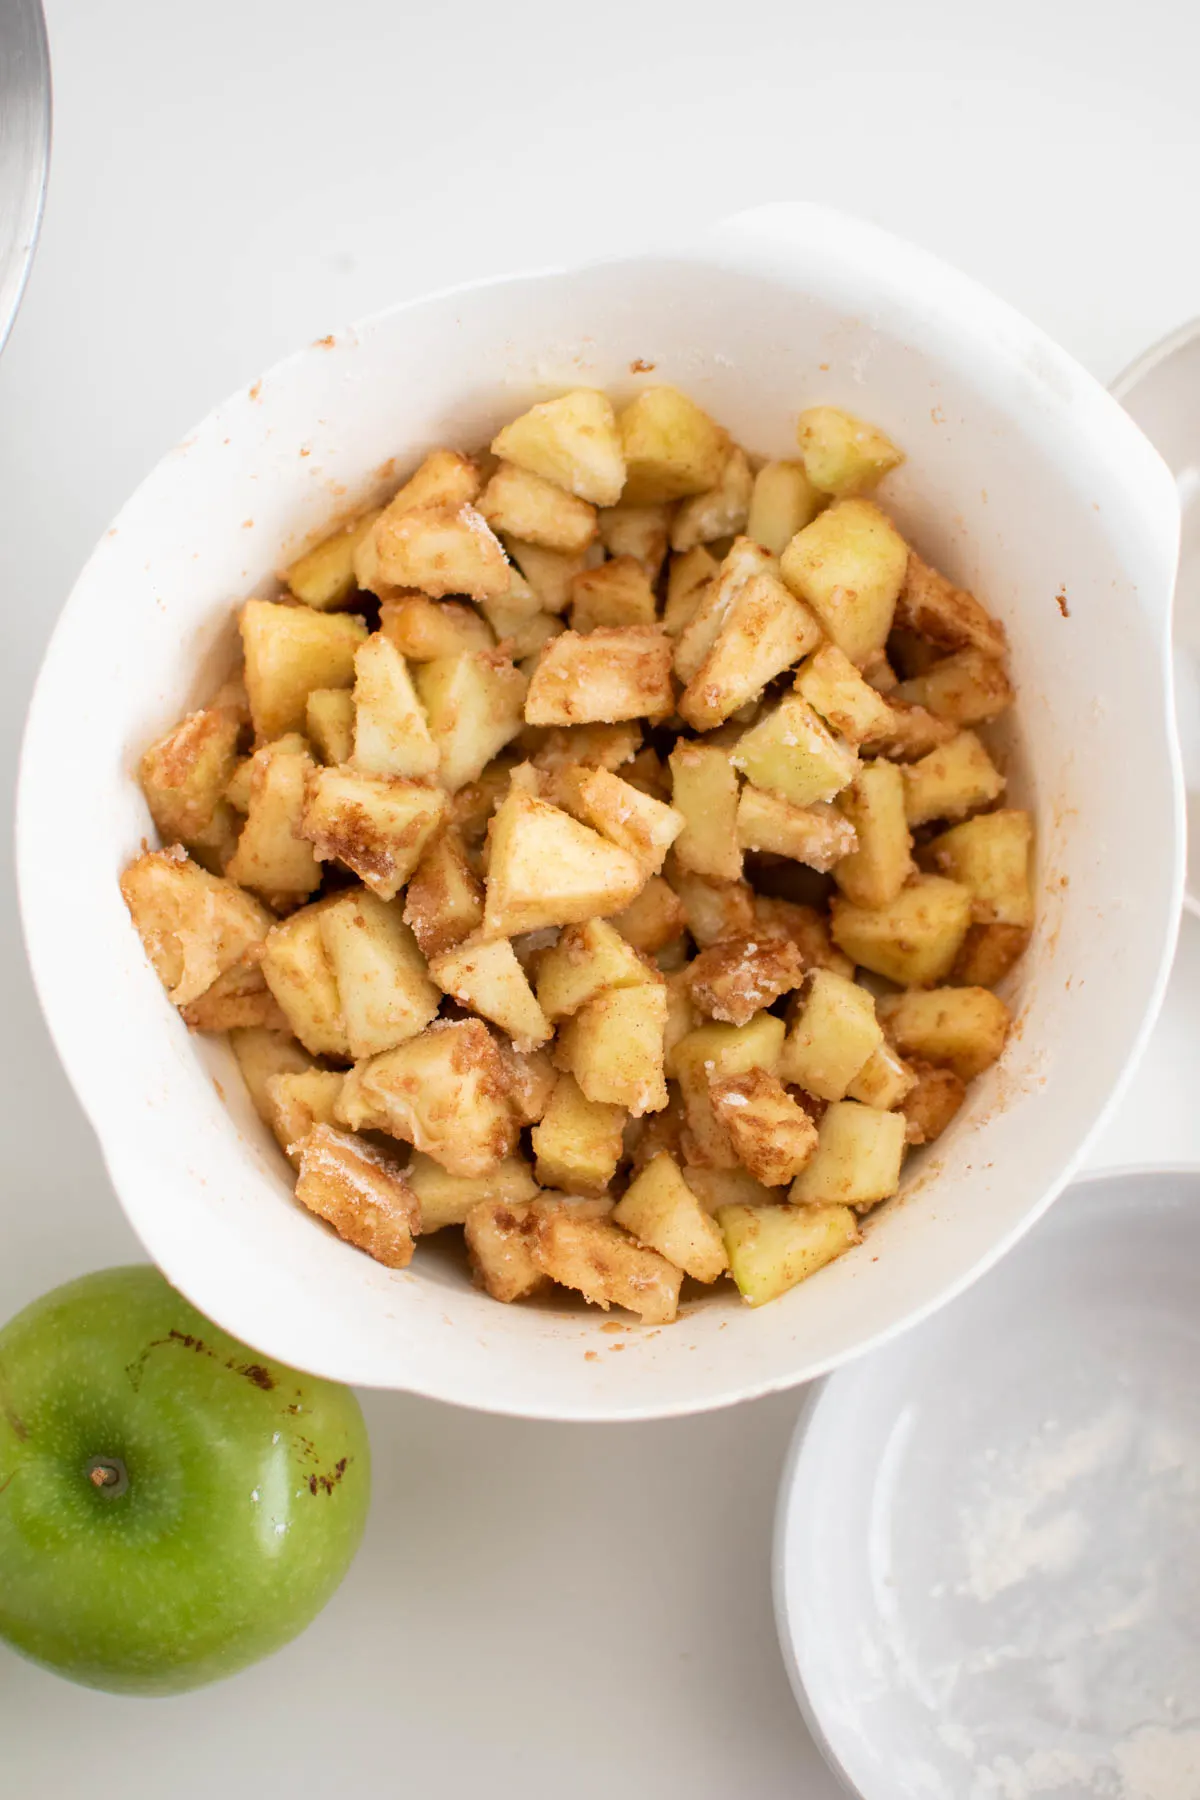 Cinnamon apple pieces in white mixing bowl surrounded by Granny Smith apple.